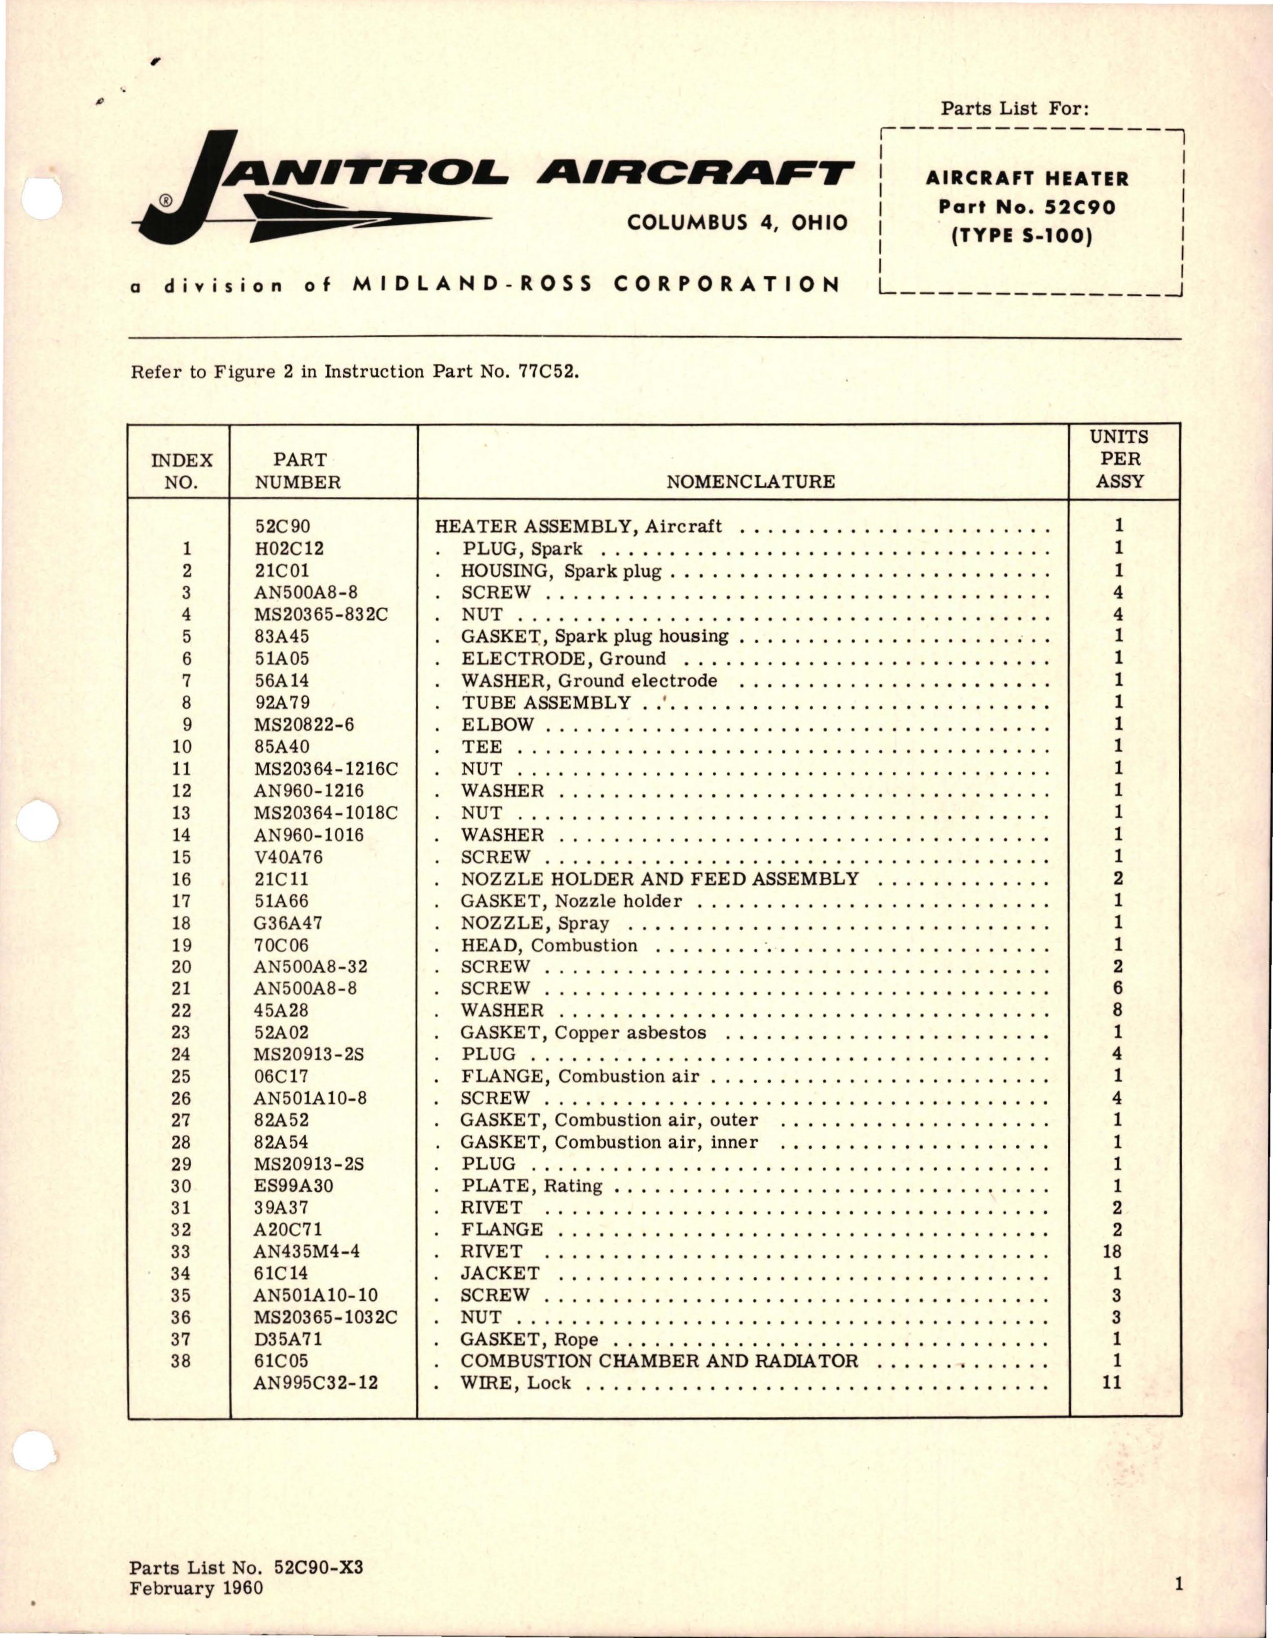 Sample page 1 from AirCorps Library document: Parts List for Aircraft Heater - Part 52C90 - Type S-100